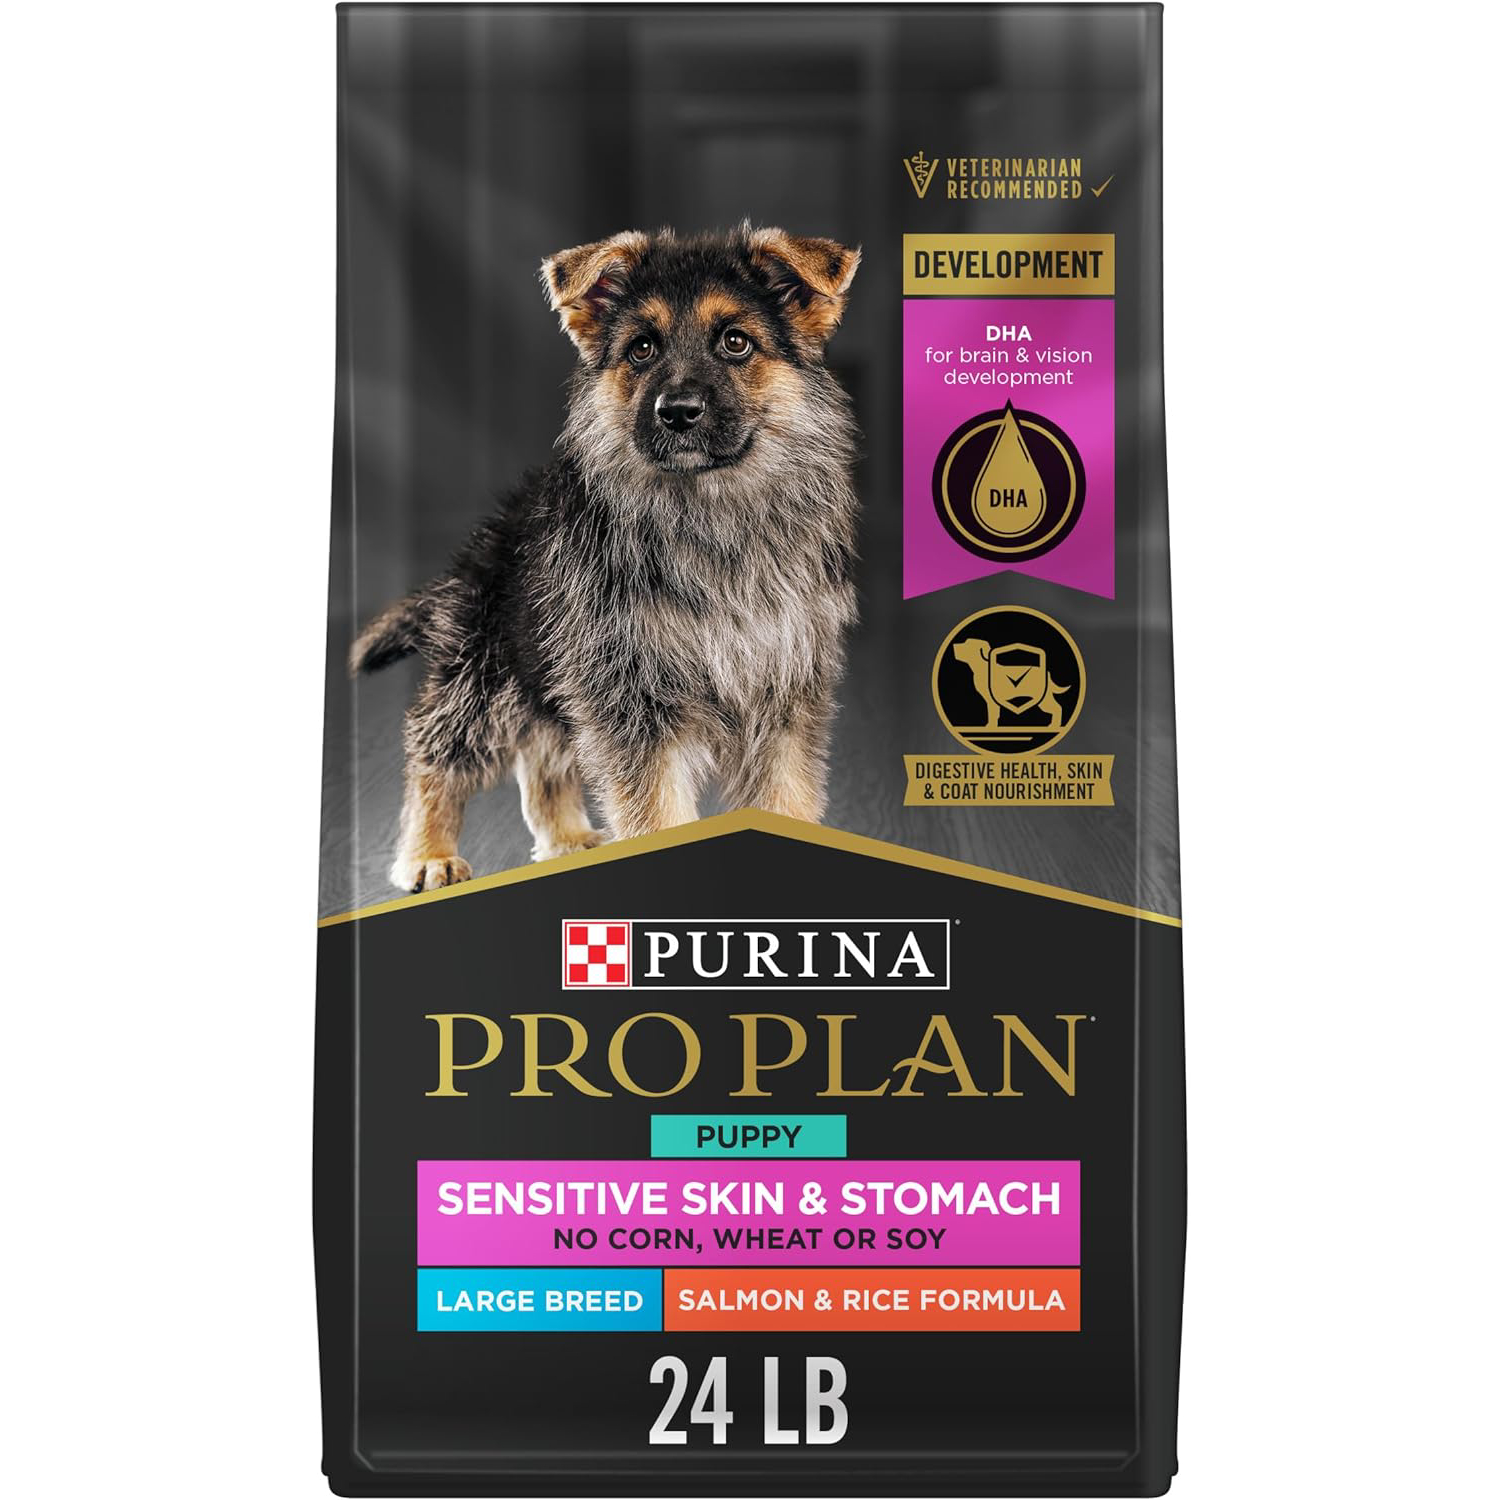 Purina Pro Plan Sensitive Skin and Stomach Large Breed Puppy Food Salmon and Rice Formula 